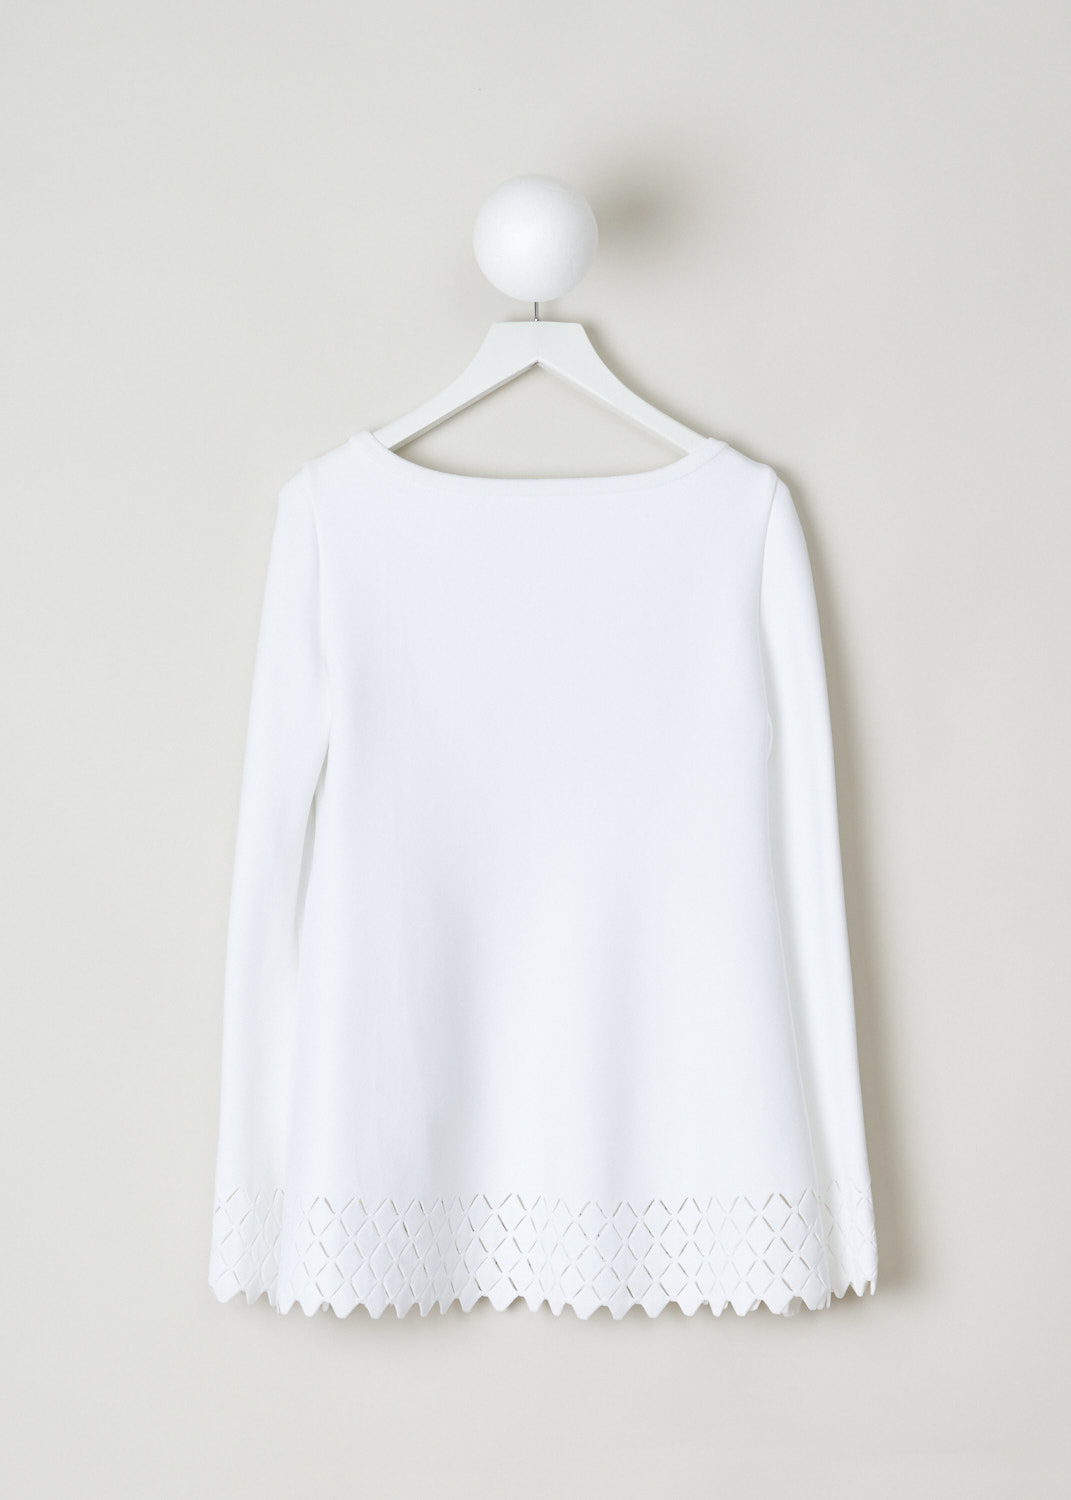 AlaÃ¯a, White A-line top with diamond detailing, 8S9UE80LM381_C000, White, Front, White A-line top with a boat neckline. The heavy duty fabric feels sturdy but also stretchy. The cuffs of the long sleeves are adorned with a diamond see-through laser cut hemline. That same hemline can be found across the bottom of the top.